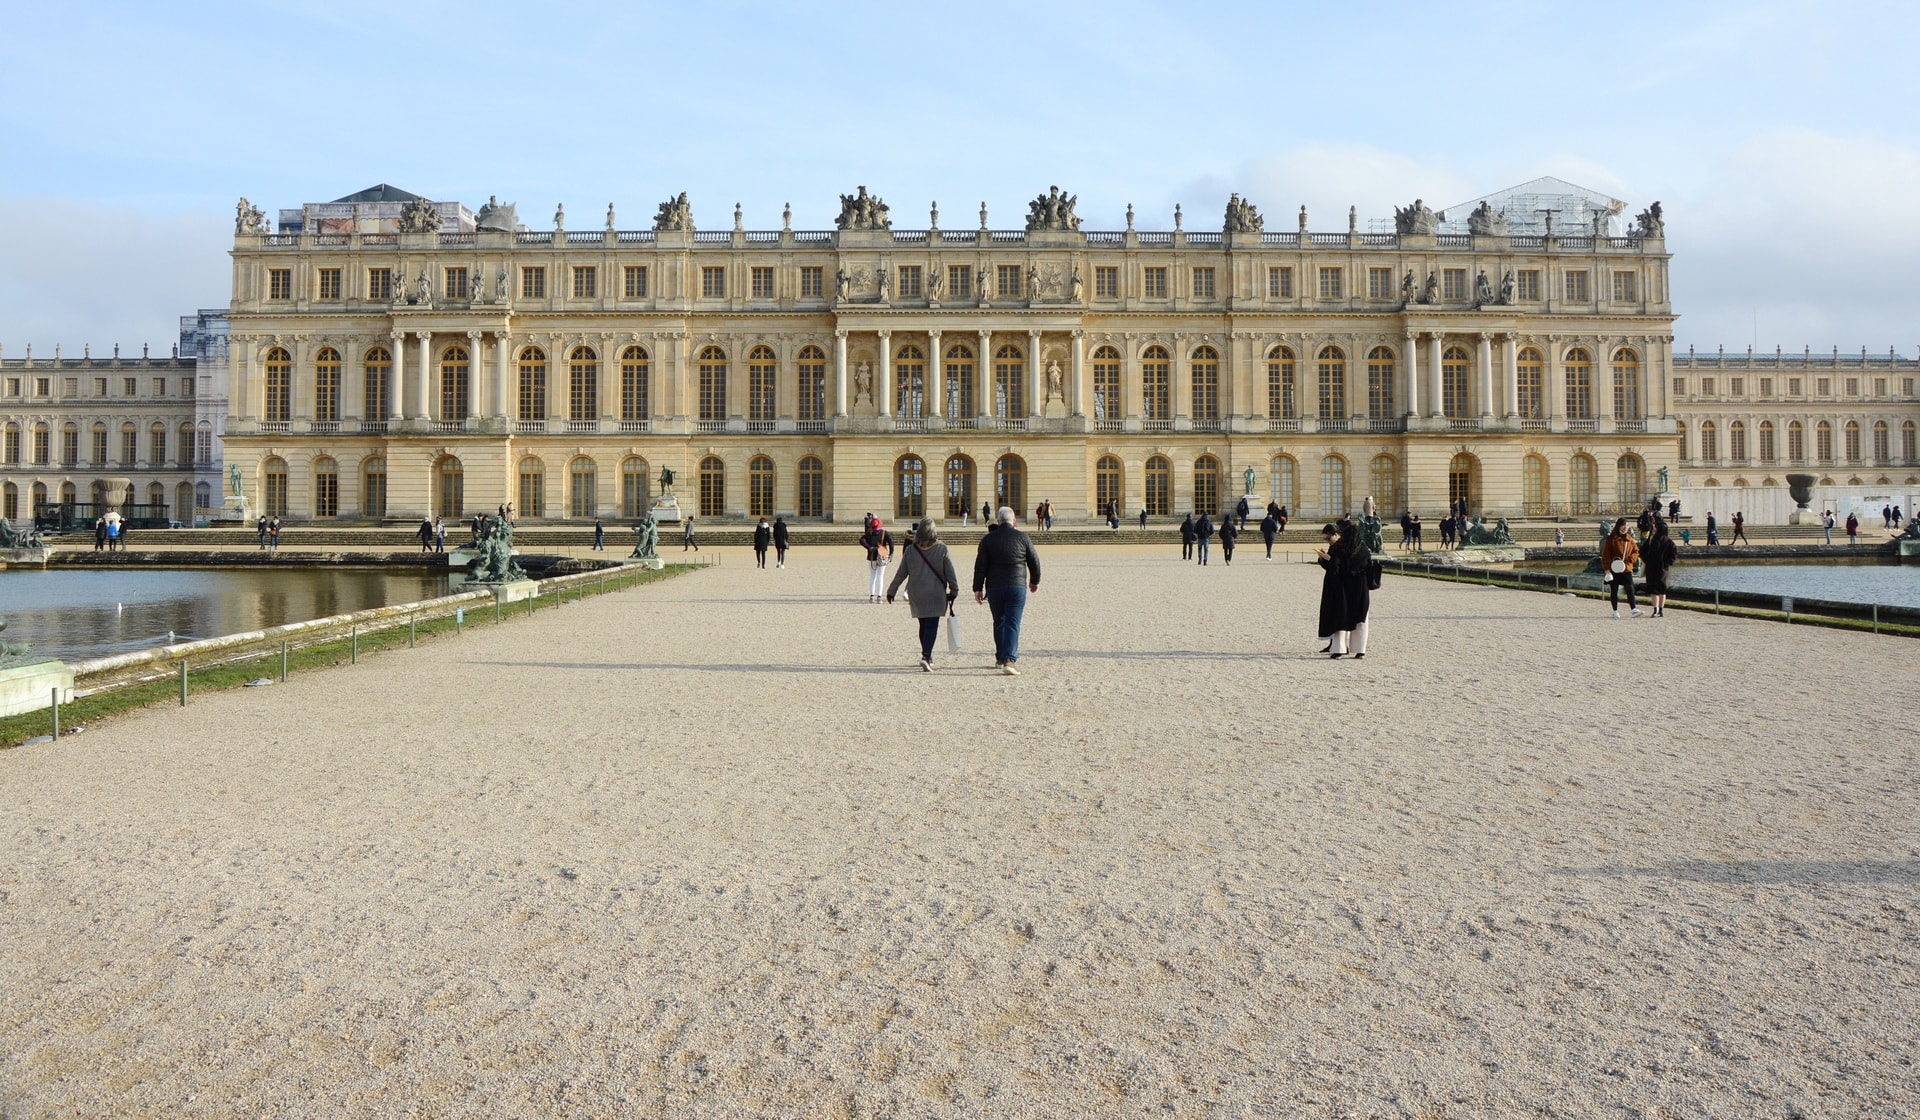 The Palace of Versailles, looking from its gardens